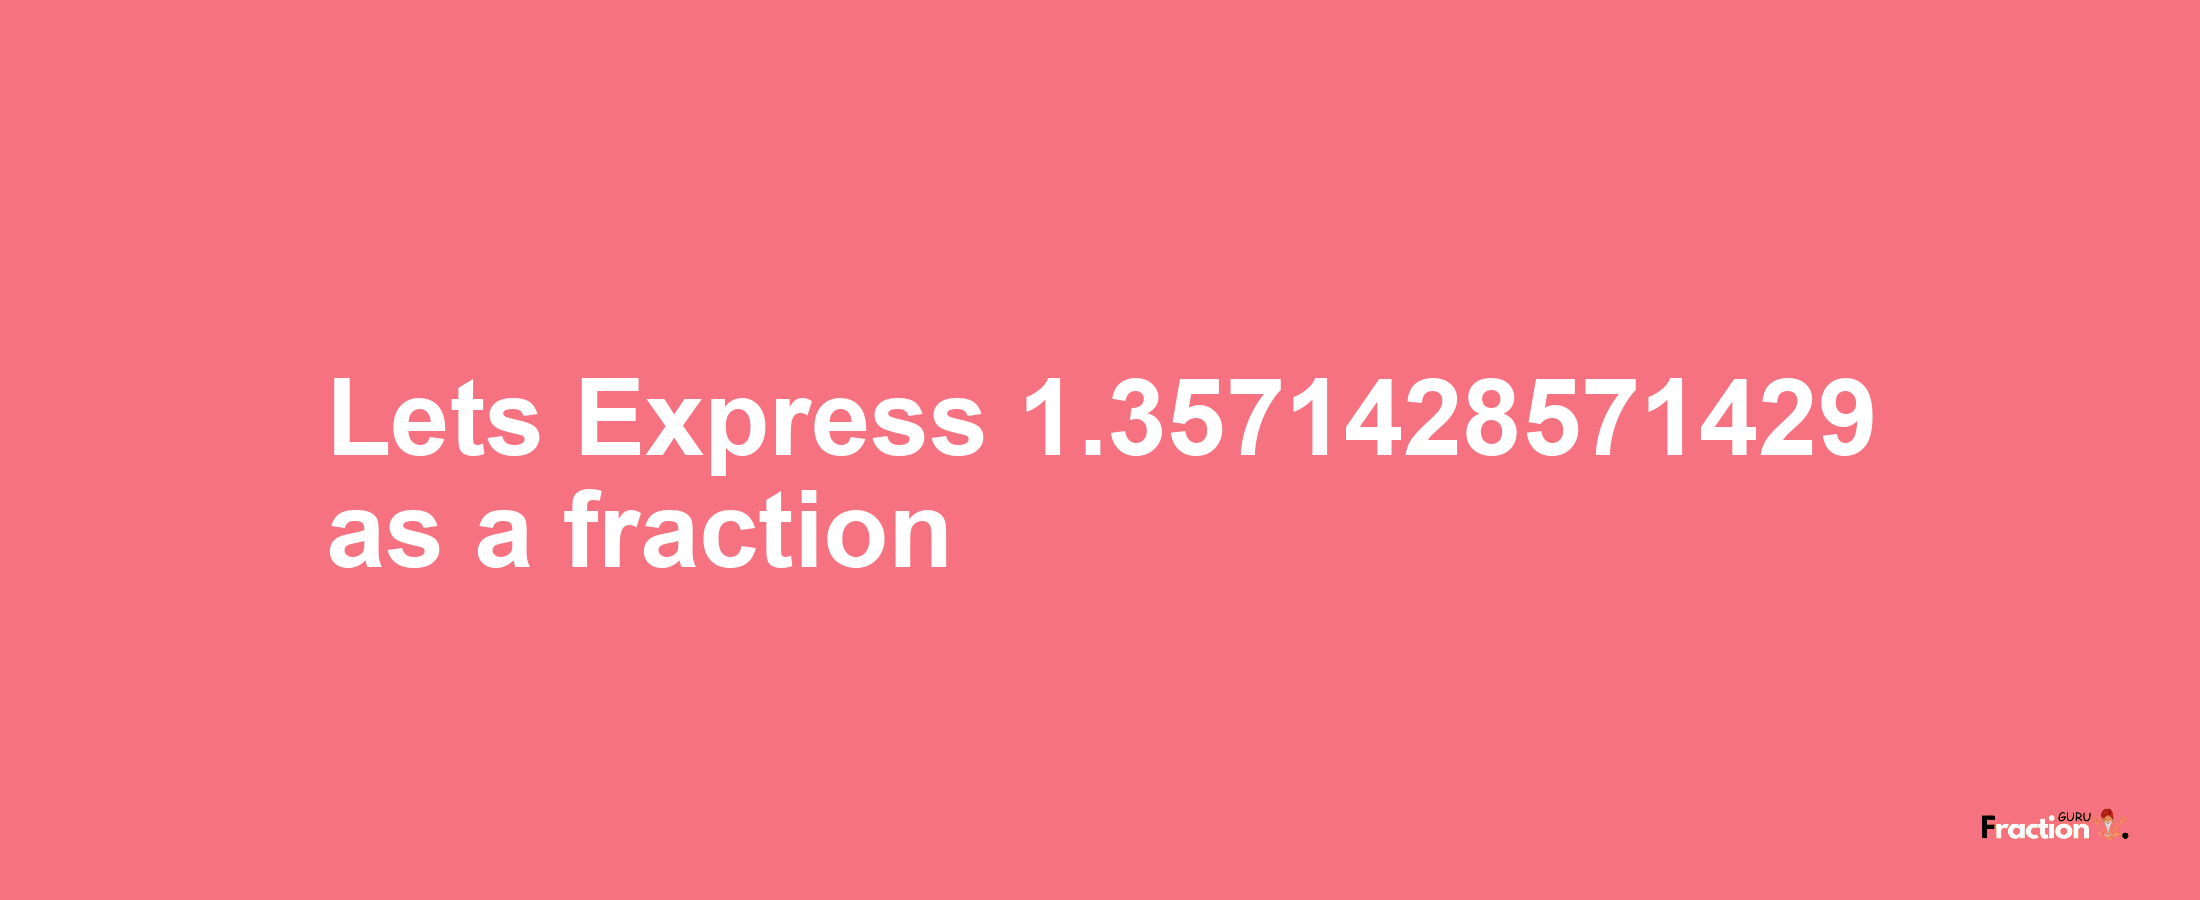 Lets Express 1.3571428571429 as afraction